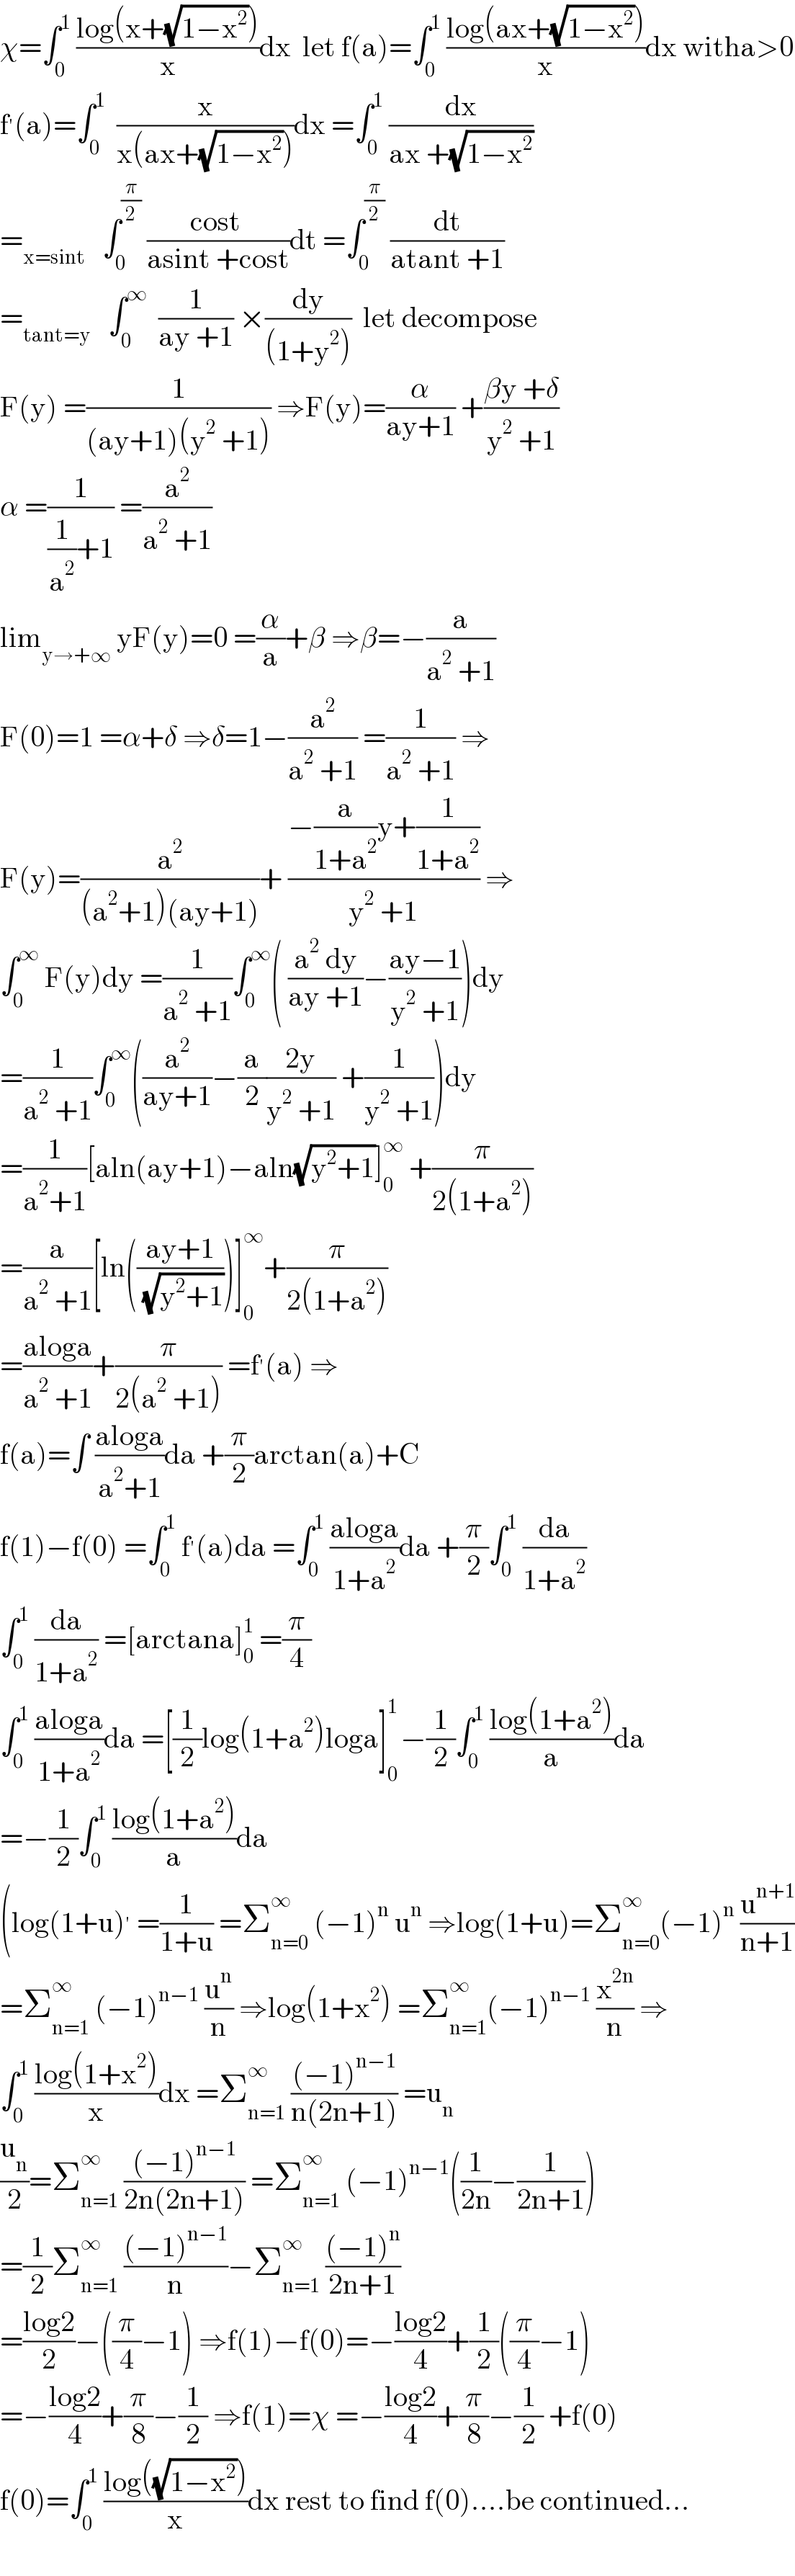 χ=∫_0 ^1  ((log(x+(√(1−x^2 ))))/x)dx  let f(a)=∫_0 ^1  ((log(ax+(√(1−x^2 ))))/x)dx witha>0  f^′ (a)=∫_0 ^1   (x/(x(ax+(√(1−x^2 )))))dx =∫_0 ^1  (dx/(ax +(√(1−x^2 ))))  =_(x=sint)    ∫_0 ^(π/2)  ((cost )/(asint +cost))dt =∫_0 ^(π/2)  (dt/(atant +1))  =_(tant=y)    ∫_0 ^∞   (1/(ay +1)) ×(dy/((1+y^2 )))  let decompose  F(y) =(1/((ay+1)(y^2  +1))) ⇒F(y)=(α/(ay+1)) +((βy +δ)/(y^2  +1))  α =(1/((1/a^2 )+1)) =(a^2 /(a^2  +1))  lim_(y→+∞)  yF(y)=0 =(α/a)+β ⇒β=−(a/(a^2  +1))  F(0)=1 =α+δ ⇒δ=1−(a^2 /(a^2  +1)) =(1/(a^2  +1)) ⇒  F(y)=(a^2 /((a^2 +1)(ay+1)))+ ((−(a/(1+a^2 ))y+(1/(1+a^2 )))/(y^2  +1)) ⇒  ∫_0 ^∞  F(y)dy =(1/(a^2  +1))∫_0 ^∞ ( ((a^2  dy)/(ay +1))−((ay−1)/(y^2  +1)))dy  =(1/(a^2  +1))∫_0 ^∞ ((a^2 /(ay+1))−(a/2)((2y)/(y^2  +1)) +(1/(y^2  +1)))dy  =(1/(a^2 +1))[aln(ay+1)−aln(√(y^2 +1))]_0 ^∞  +(π/(2(1+a^2 )))  =(a/(a^2  +1))[ln(((ay+1)/( (√(y^2 +1)))))]_0 ^∞ +(π/(2(1+a^2 )))  =((aloga)/(a^2  +1))+(π/(2(a^2  +1))) =f^′ (a) ⇒  f(a)=∫ ((aloga)/(a^2 +1))da +(π/2)arctan(a)+C  f(1)−f(0) =∫_0 ^1  f^′ (a)da =∫_0 ^1  ((aloga)/(1+a^2 ))da +(π/2)∫_0 ^1  (da/(1+a^2 ))  ∫_0 ^1  (da/(1+a^2 )) =[arctana]_0 ^1  =(π/4)  ∫_0 ^1  ((aloga)/(1+a^2 ))da =[(1/2)log(1+a^2 )loga]_0 ^(1 ) −(1/2)∫_0 ^1  ((log(1+a^2 ))/a)da  =−(1/2)∫_0 ^1  ((log(1+a^2 ))/a)da  (log(1+u)^′  =(1/(1+u)) =Σ_(n=0) ^∞  (−1)^n  u^n  ⇒log(1+u)=Σ_(n=0) ^∞ (−1)^n  (u^(n+1) /(n+1))  =Σ_(n=1) ^∞  (−1)^(n−1)  (u^n /n) ⇒log(1+x^2 ) =Σ_(n=1) ^∞ (−1)^(n−1)  (x^(2n) /n) ⇒  ∫_0 ^1  ((log(1+x^2 ))/x)dx =Σ_(n=1) ^∞  (((−1)^(n−1) )/(n(2n+1))) =u_n   (u_n /2)=Σ_(n=1) ^∞  (((−1)^(n−1) )/(2n(2n+1))) =Σ_(n=1) ^∞  (−1)^(n−1) ((1/(2n))−(1/(2n+1)))  =(1/2)Σ_(n=1) ^∞  (((−1)^(n−1) )/n)−Σ_(n=1) ^∞  (((−1)^n )/(2n+1))  =((log2)/2)−((π/4)−1) ⇒f(1)−f(0)=−((log2)/4)+(1/2)((π/4)−1)  =−((log2)/4)+(π/8)−(1/2) ⇒f(1)=χ =−((log2)/4)+(π/8)−(1/2) +f(0)  f(0)=∫_0 ^1  ((log((√(1−x^2 ))))/x)dx rest to find f(0)....be continued...    